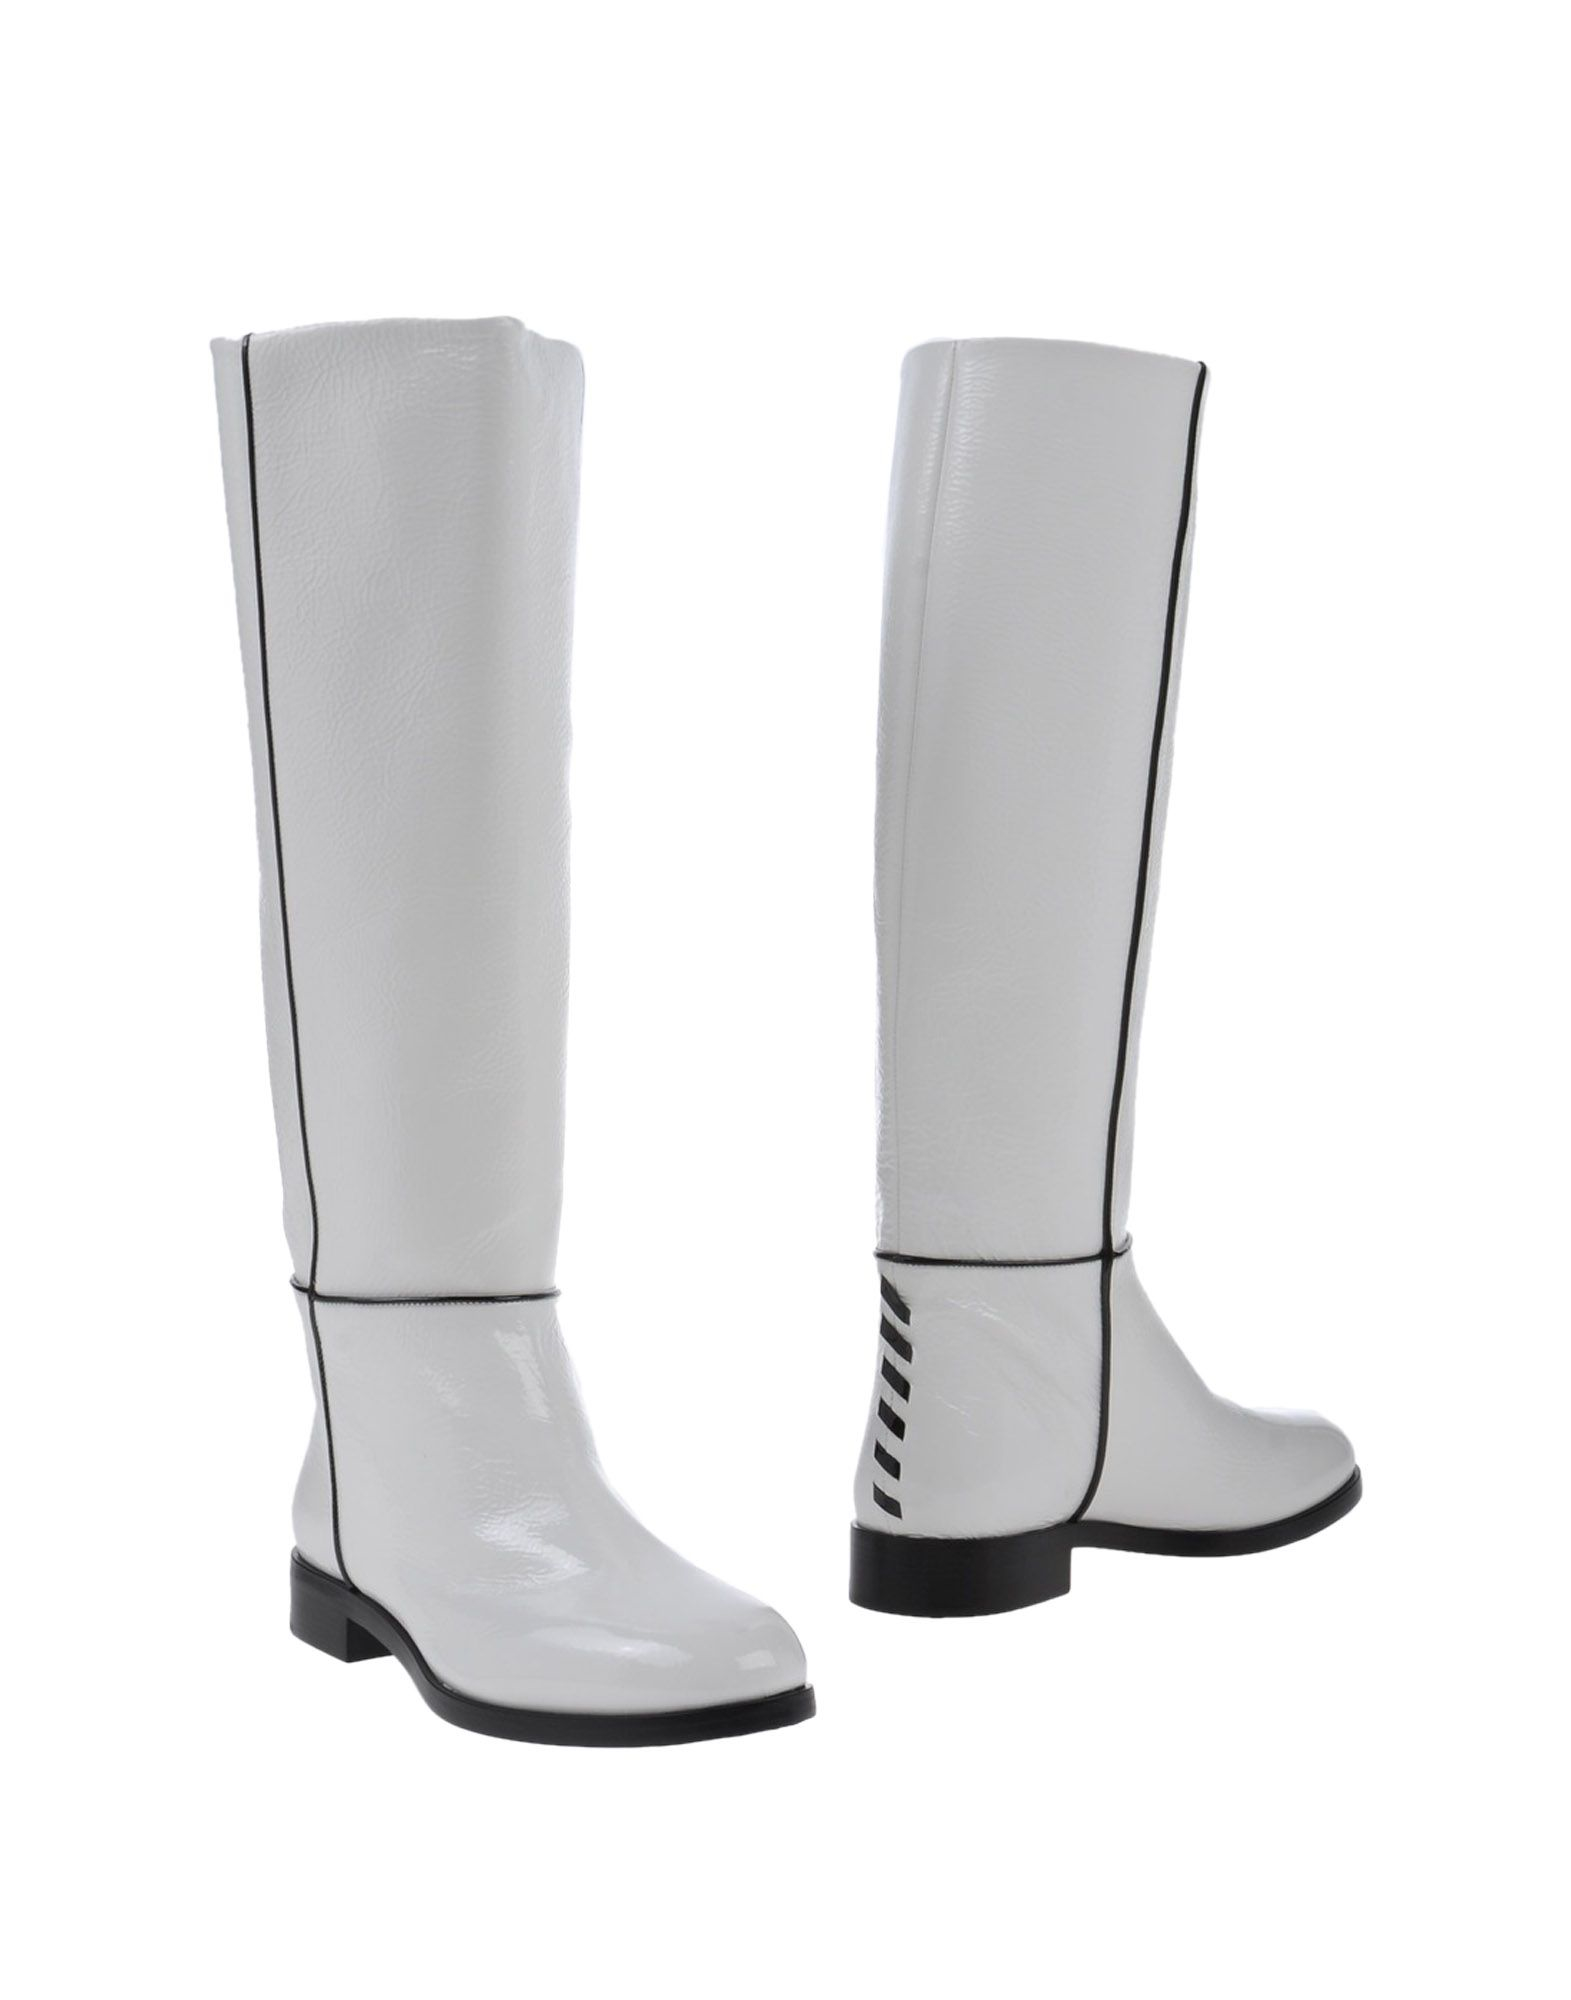 Lyst - Proenza Schouler Patent-Leather Knee-High Boots in White